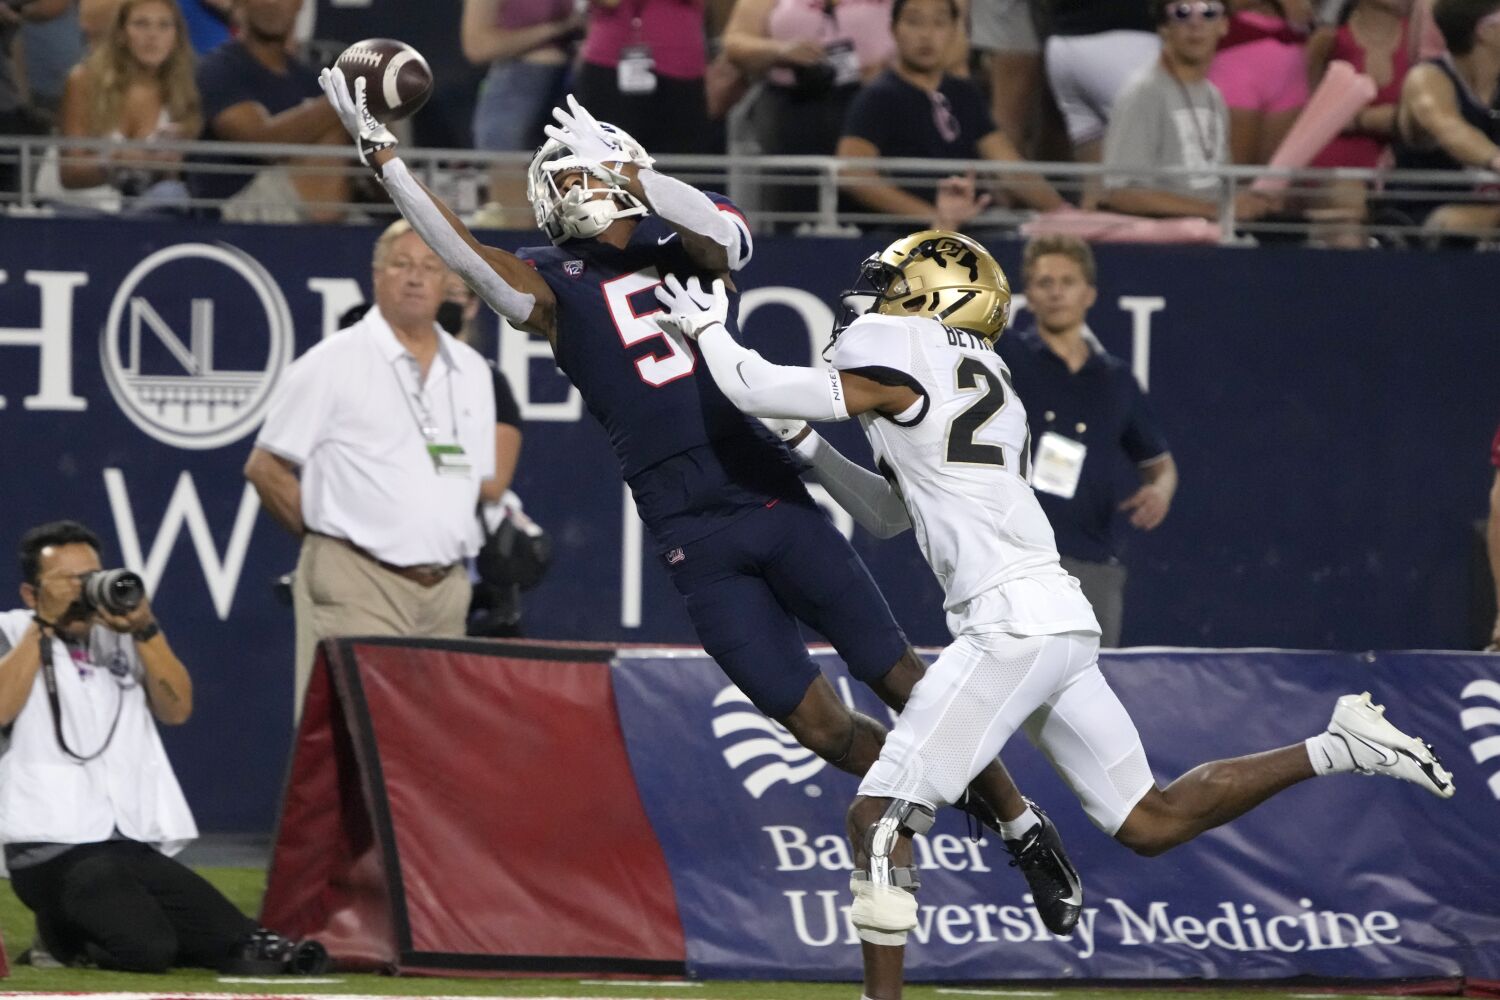 Dorian Singer, the Pac-12's top receiver, is transferring to USC from Arizona